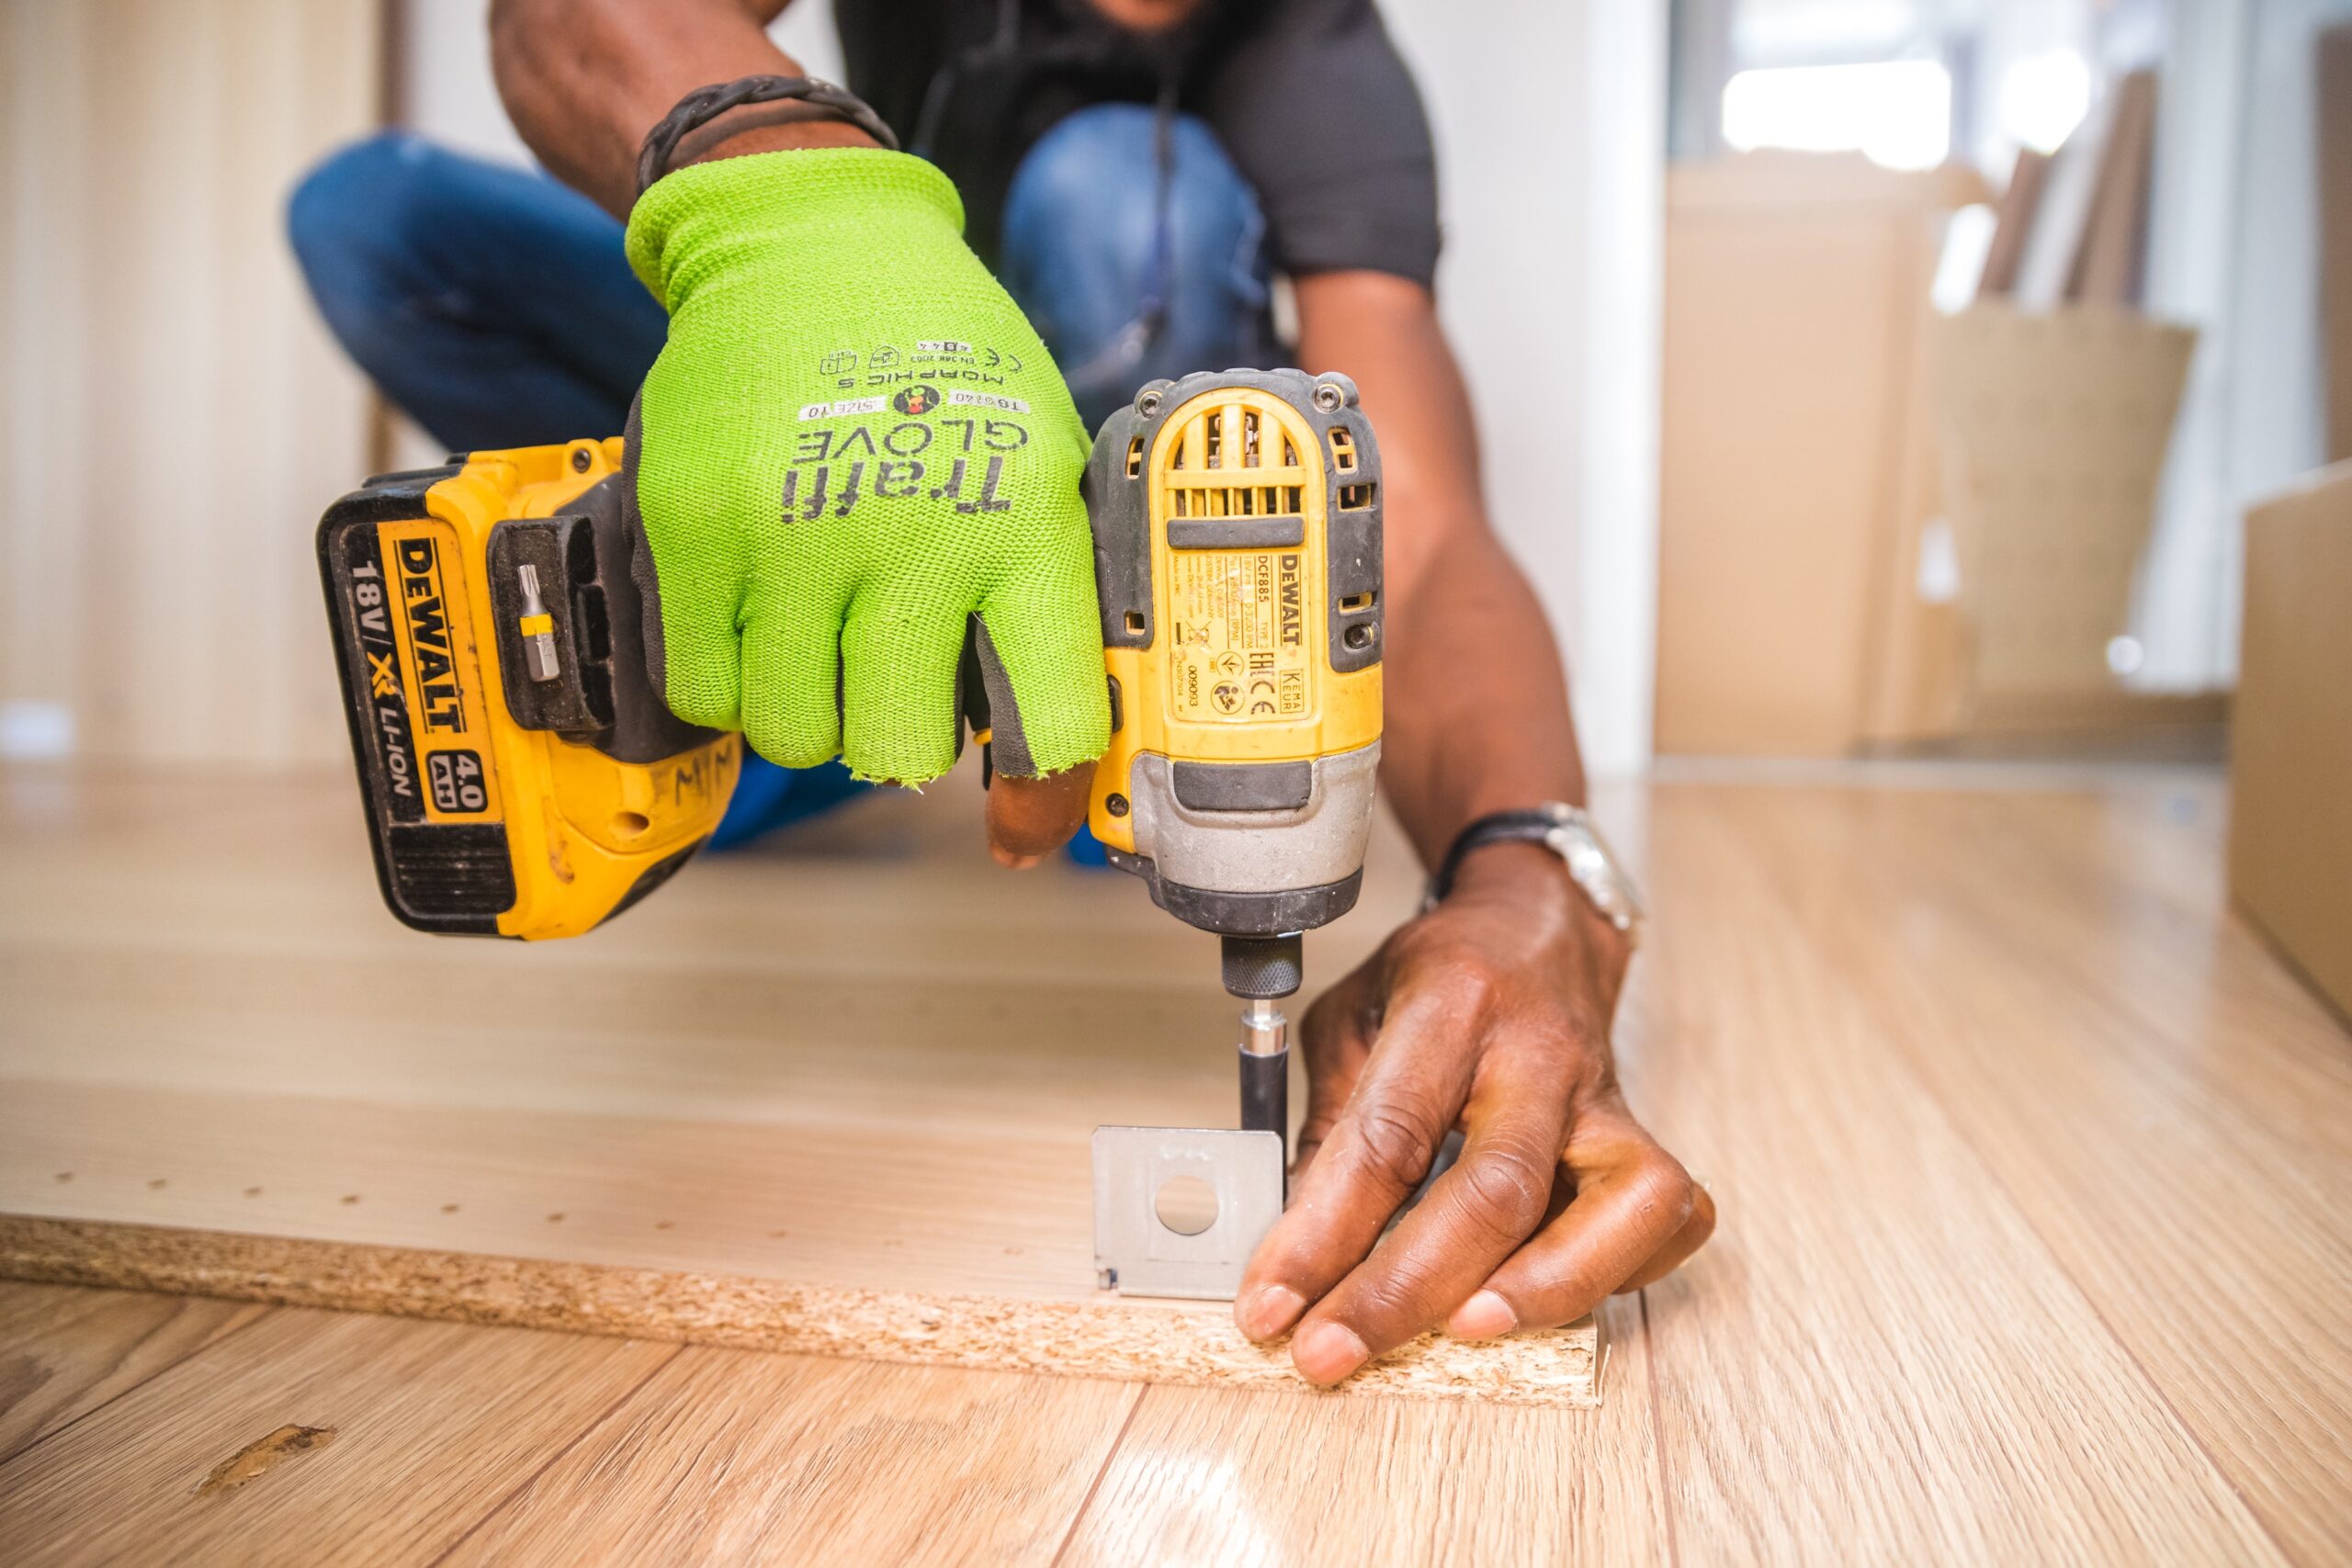 6 tools every homeowner needs for the fall